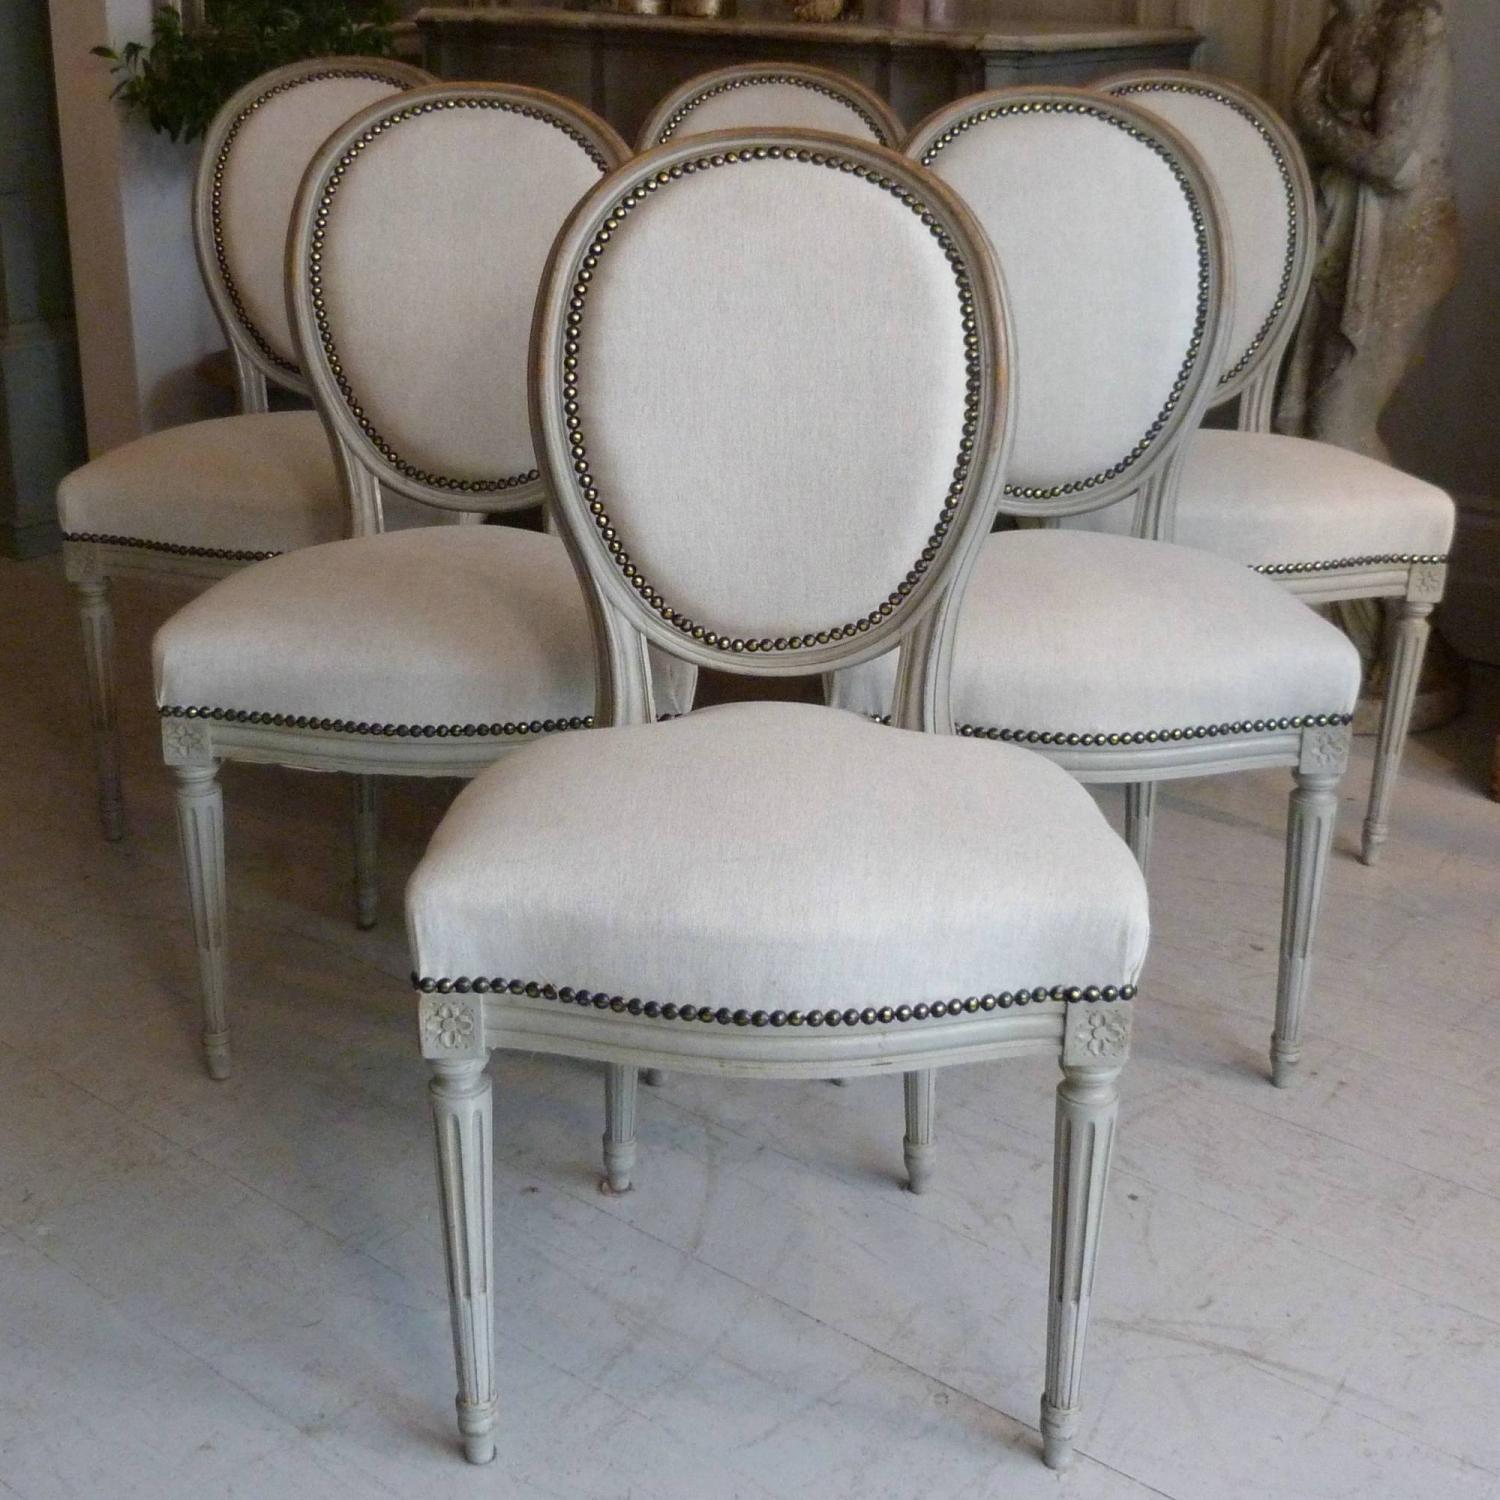 SET OF SIX 19TH CENTURY FRENCH LOUIS XVI DINING CHAIRS